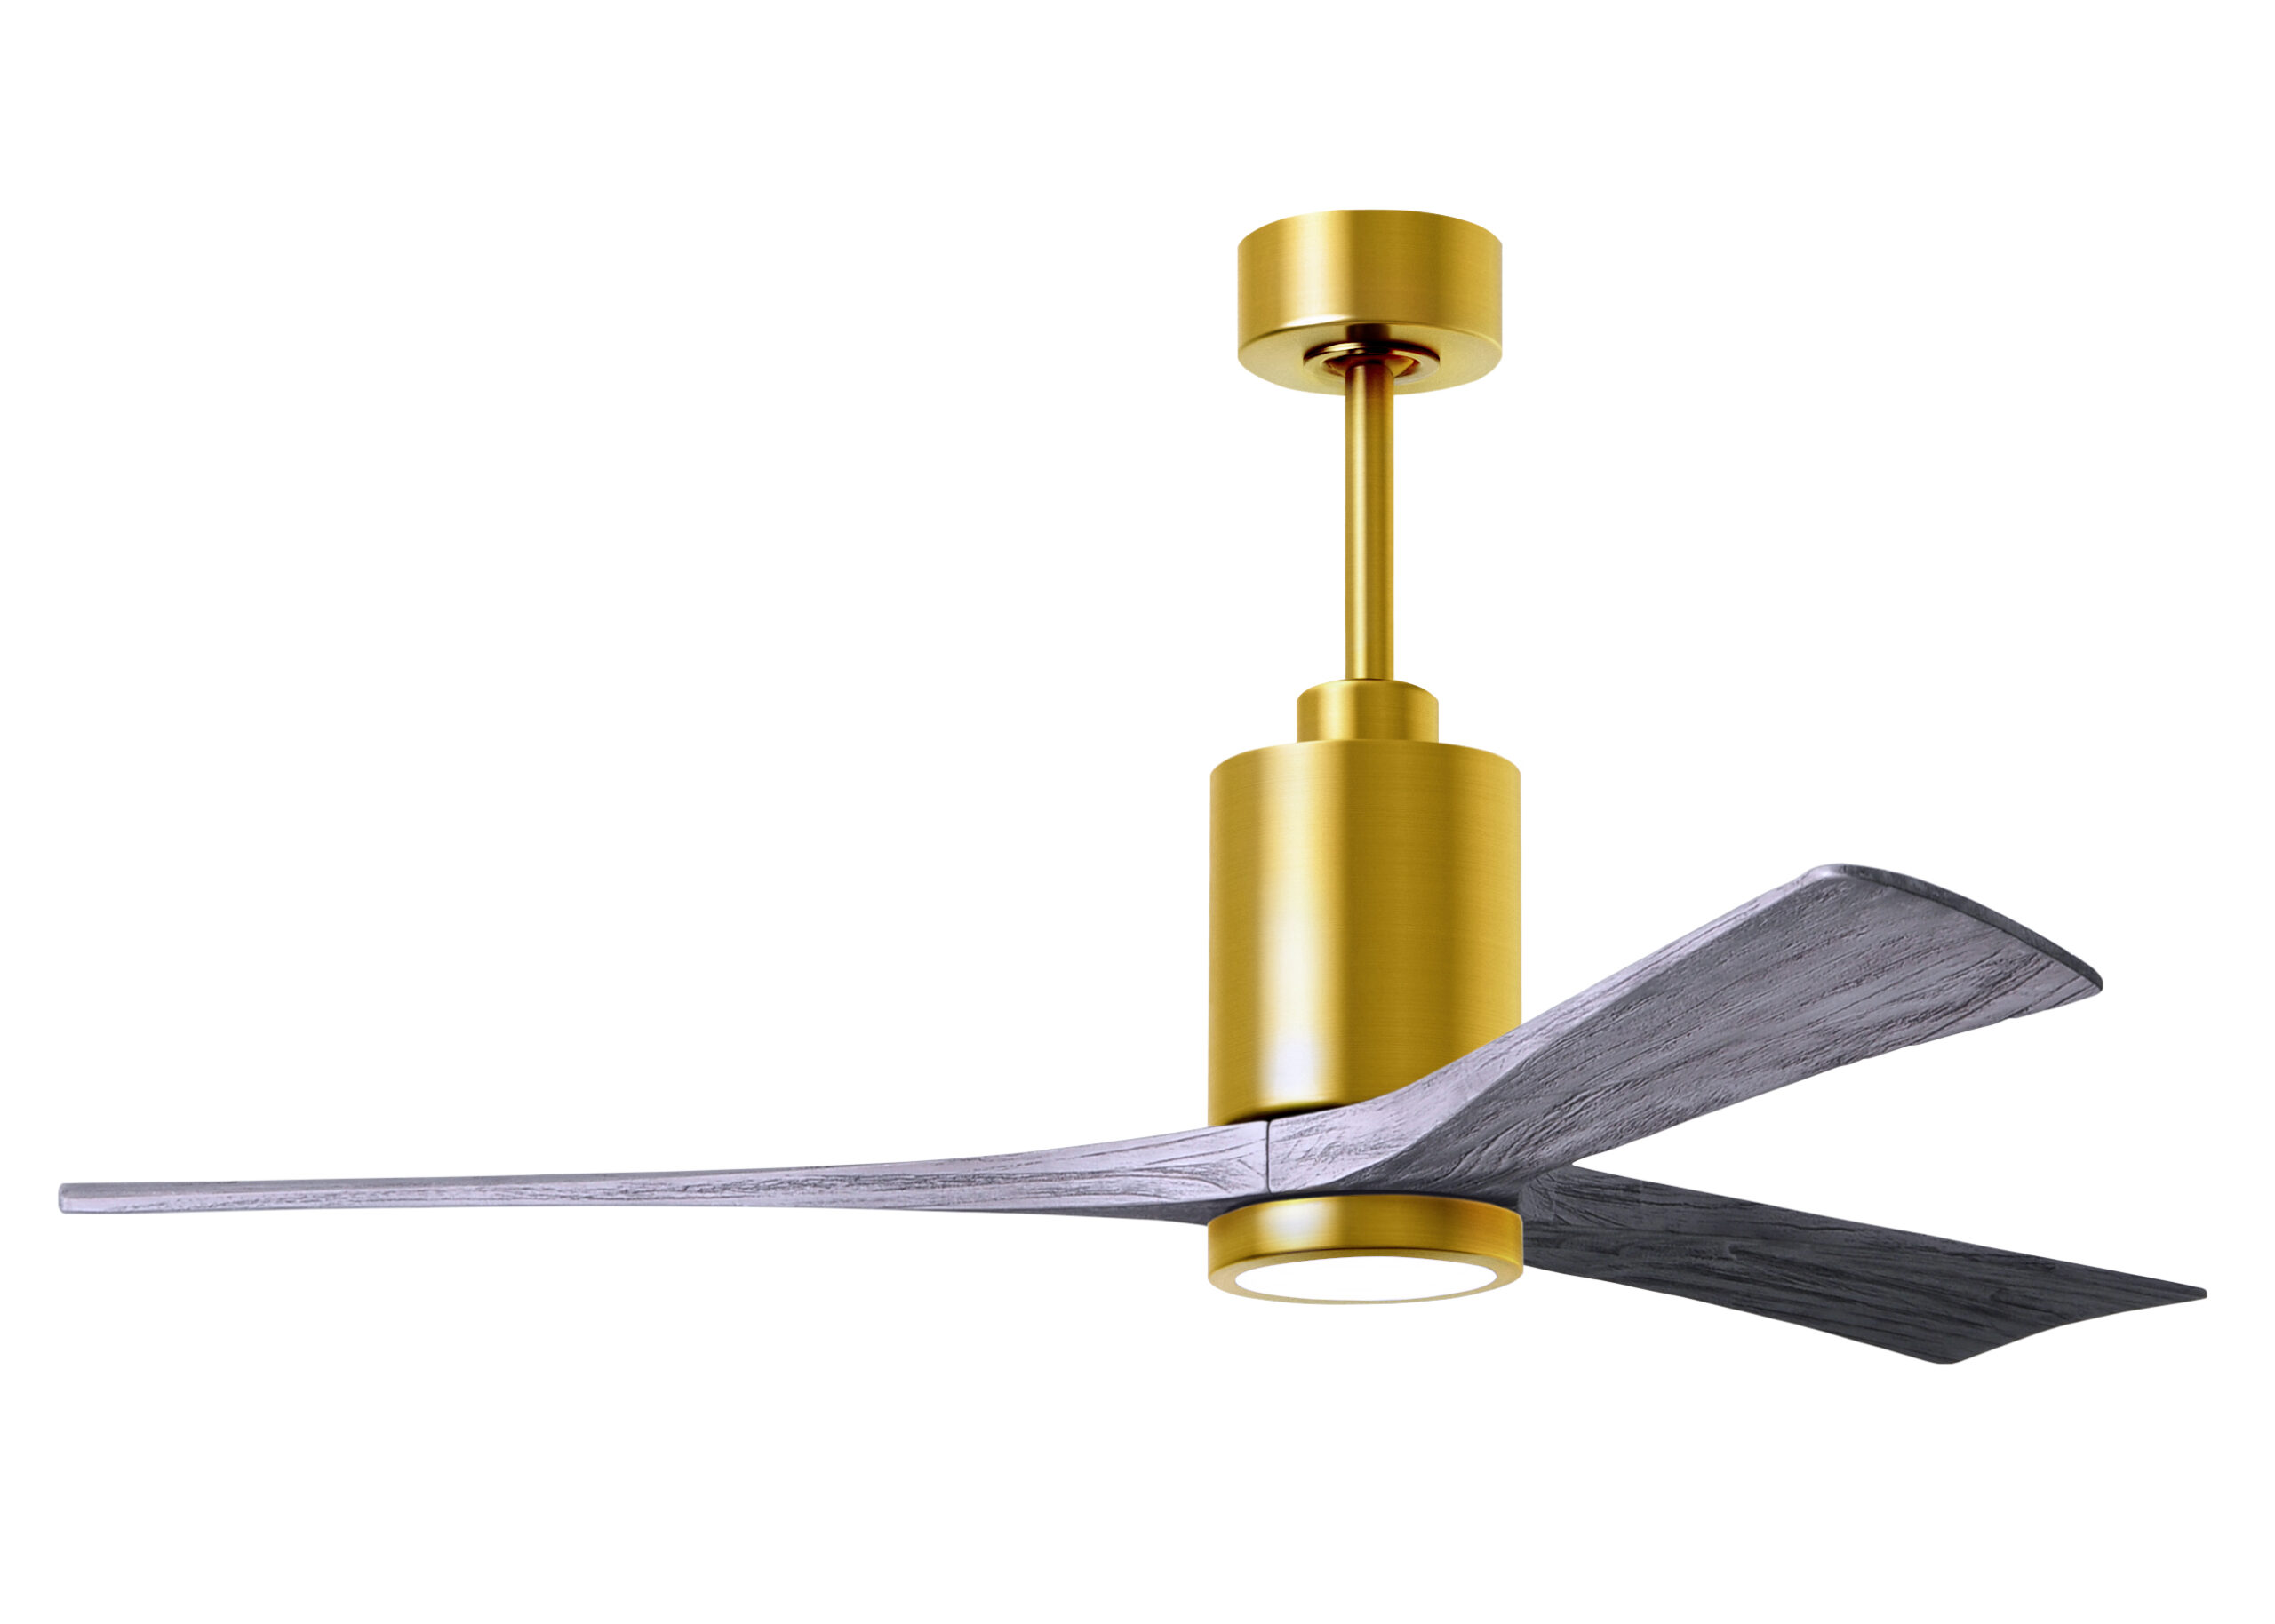 Patrícia–3 ceiling fan in Brushed Brass with 60